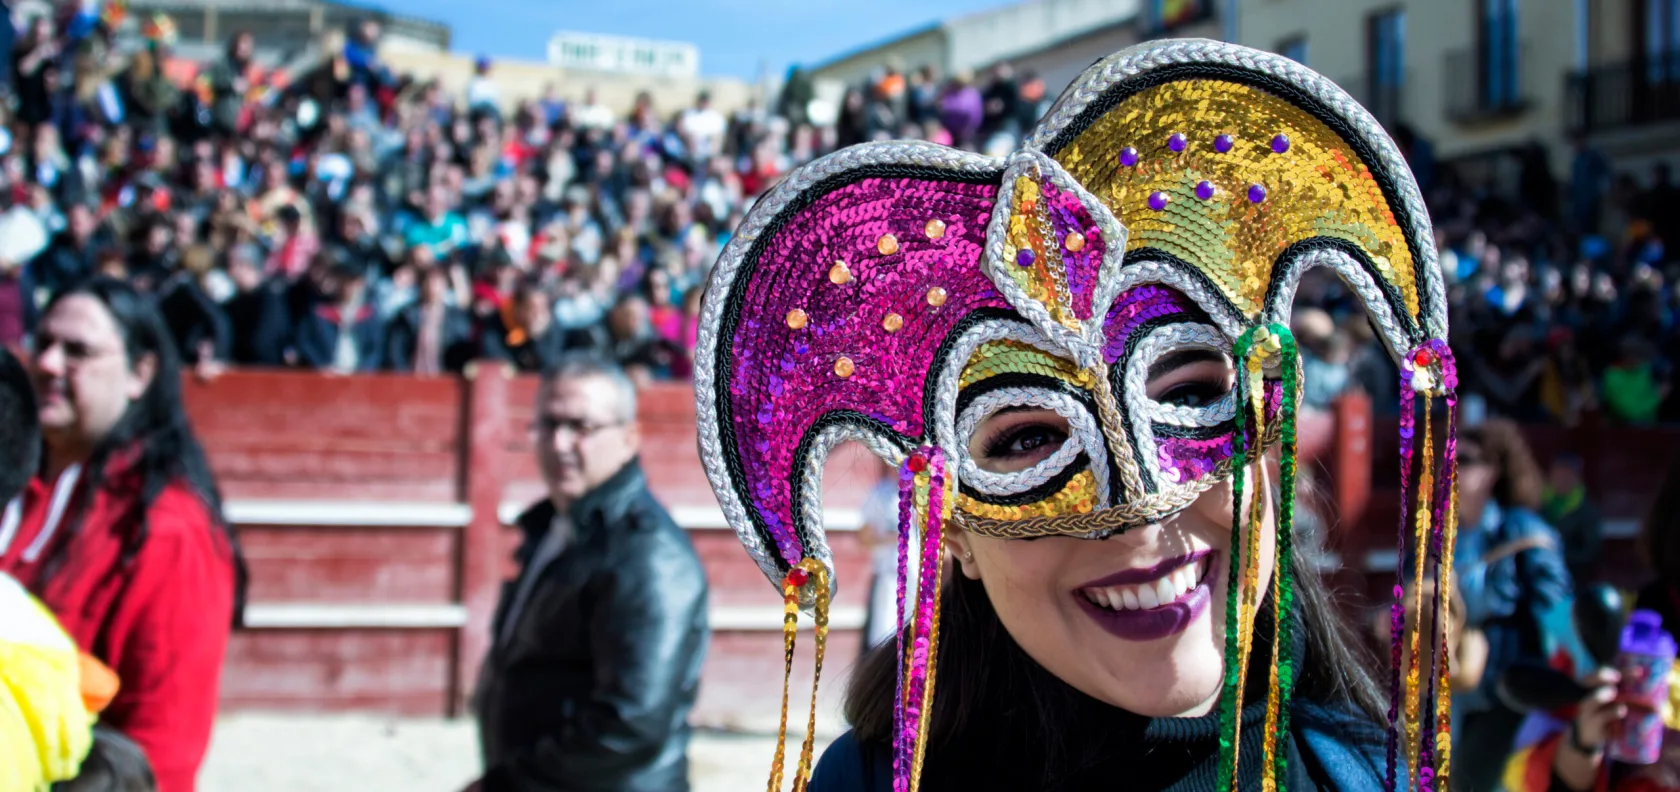 Girl wearing mask with sparkles.